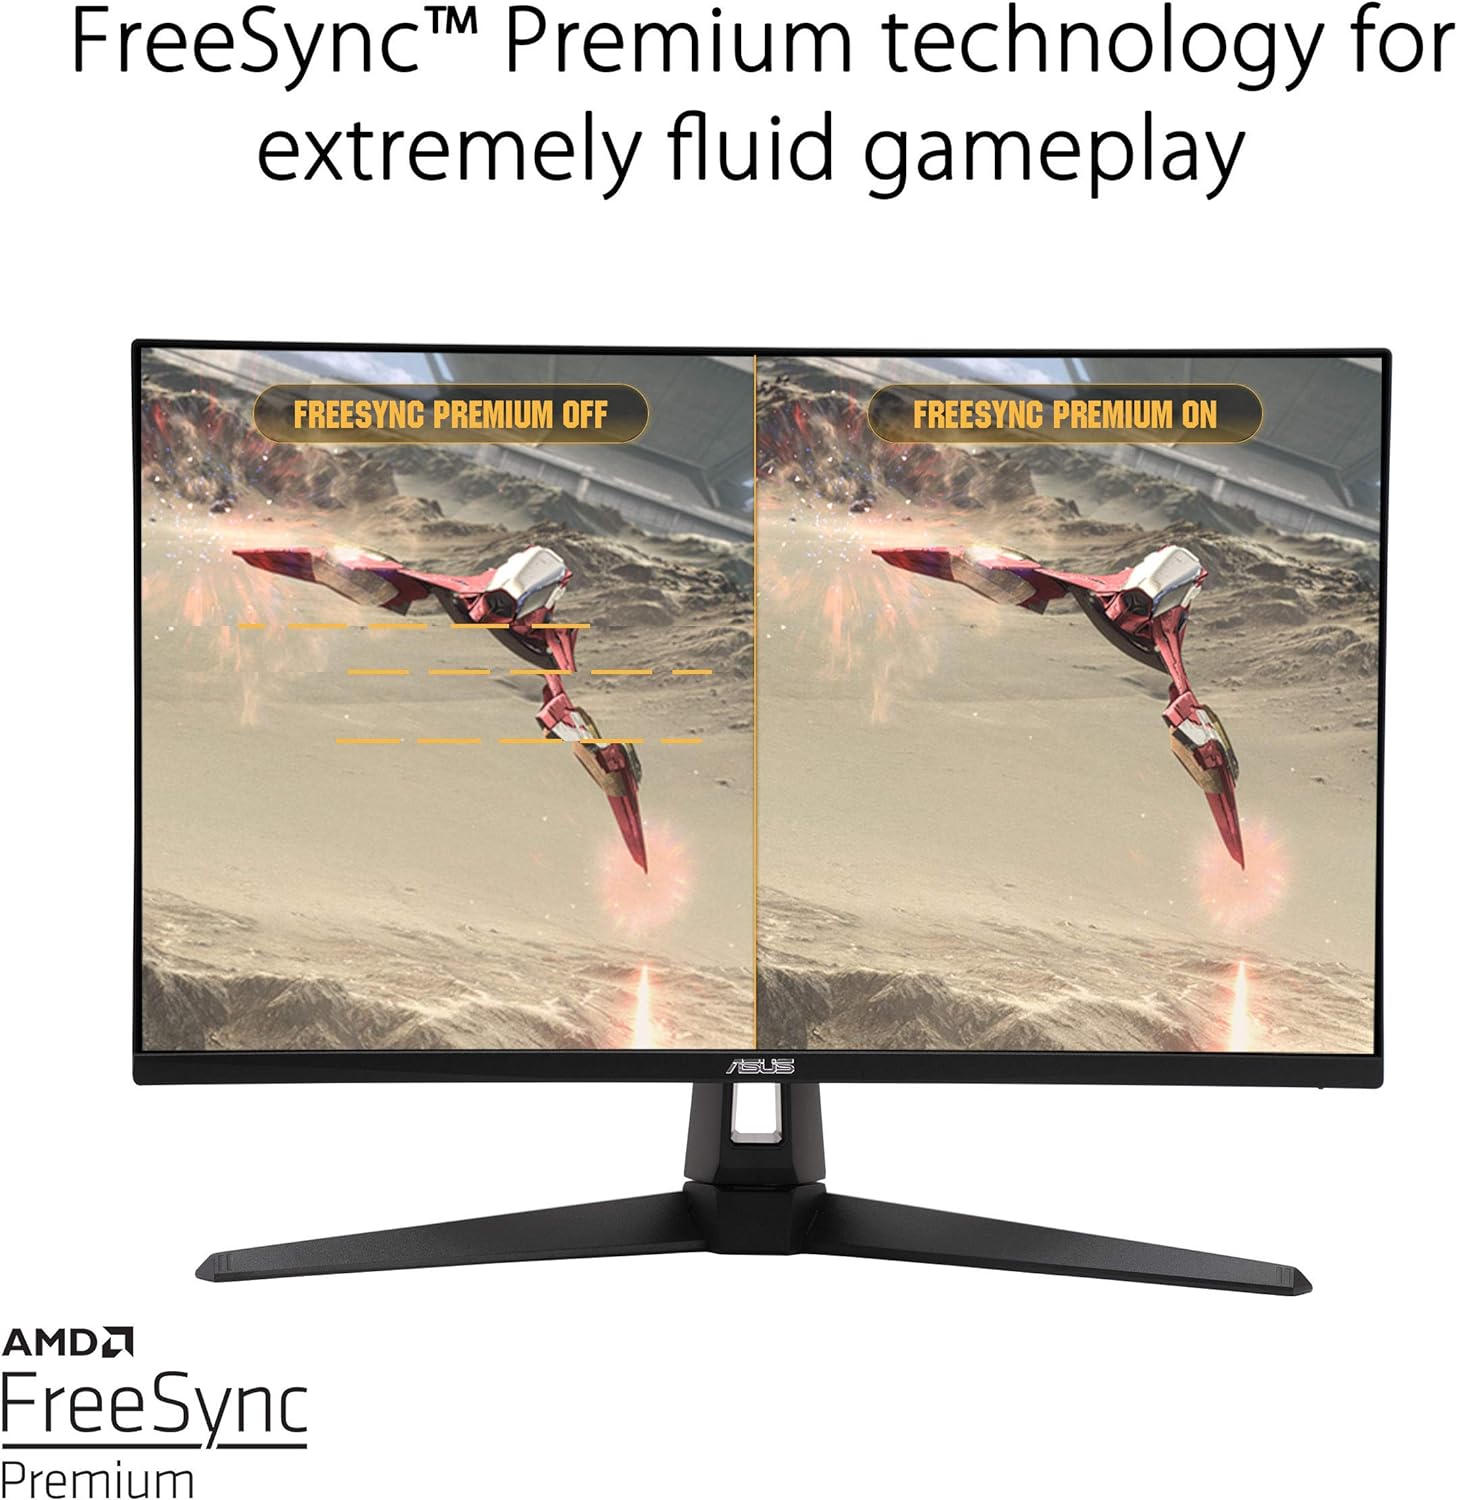 ASUS TUF Gaming VG279Q1A 27 Monitor - FreeSync Premium technology for smooth gameplay without screen tearing. 0192876870327